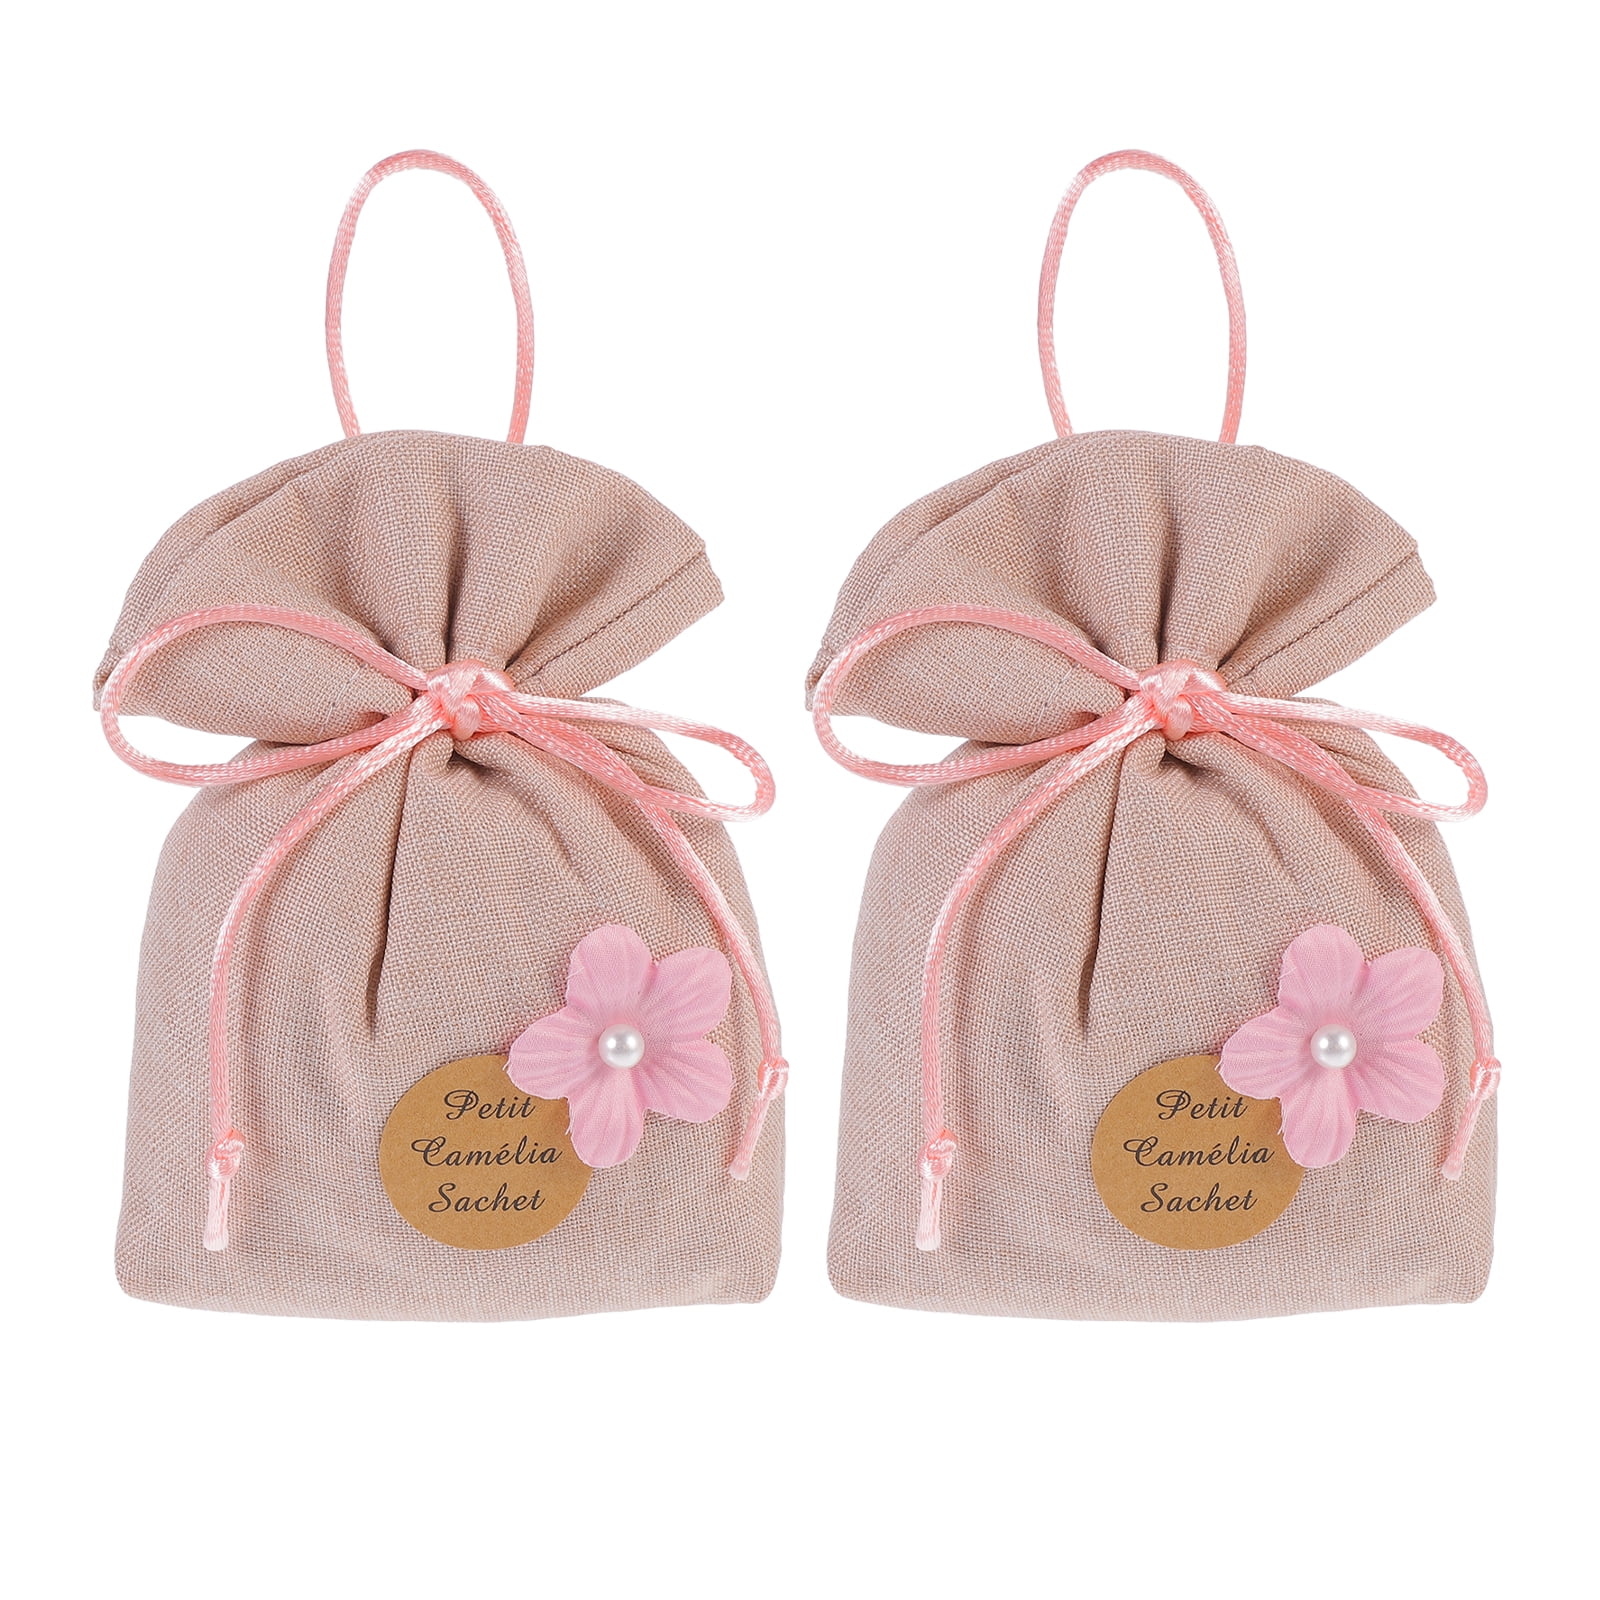 Cotton Bags Packing Gifts | Gift Packaging Cotton Bags | Cotton Aromatherapy  Bag - 6pcs - Aliexpress